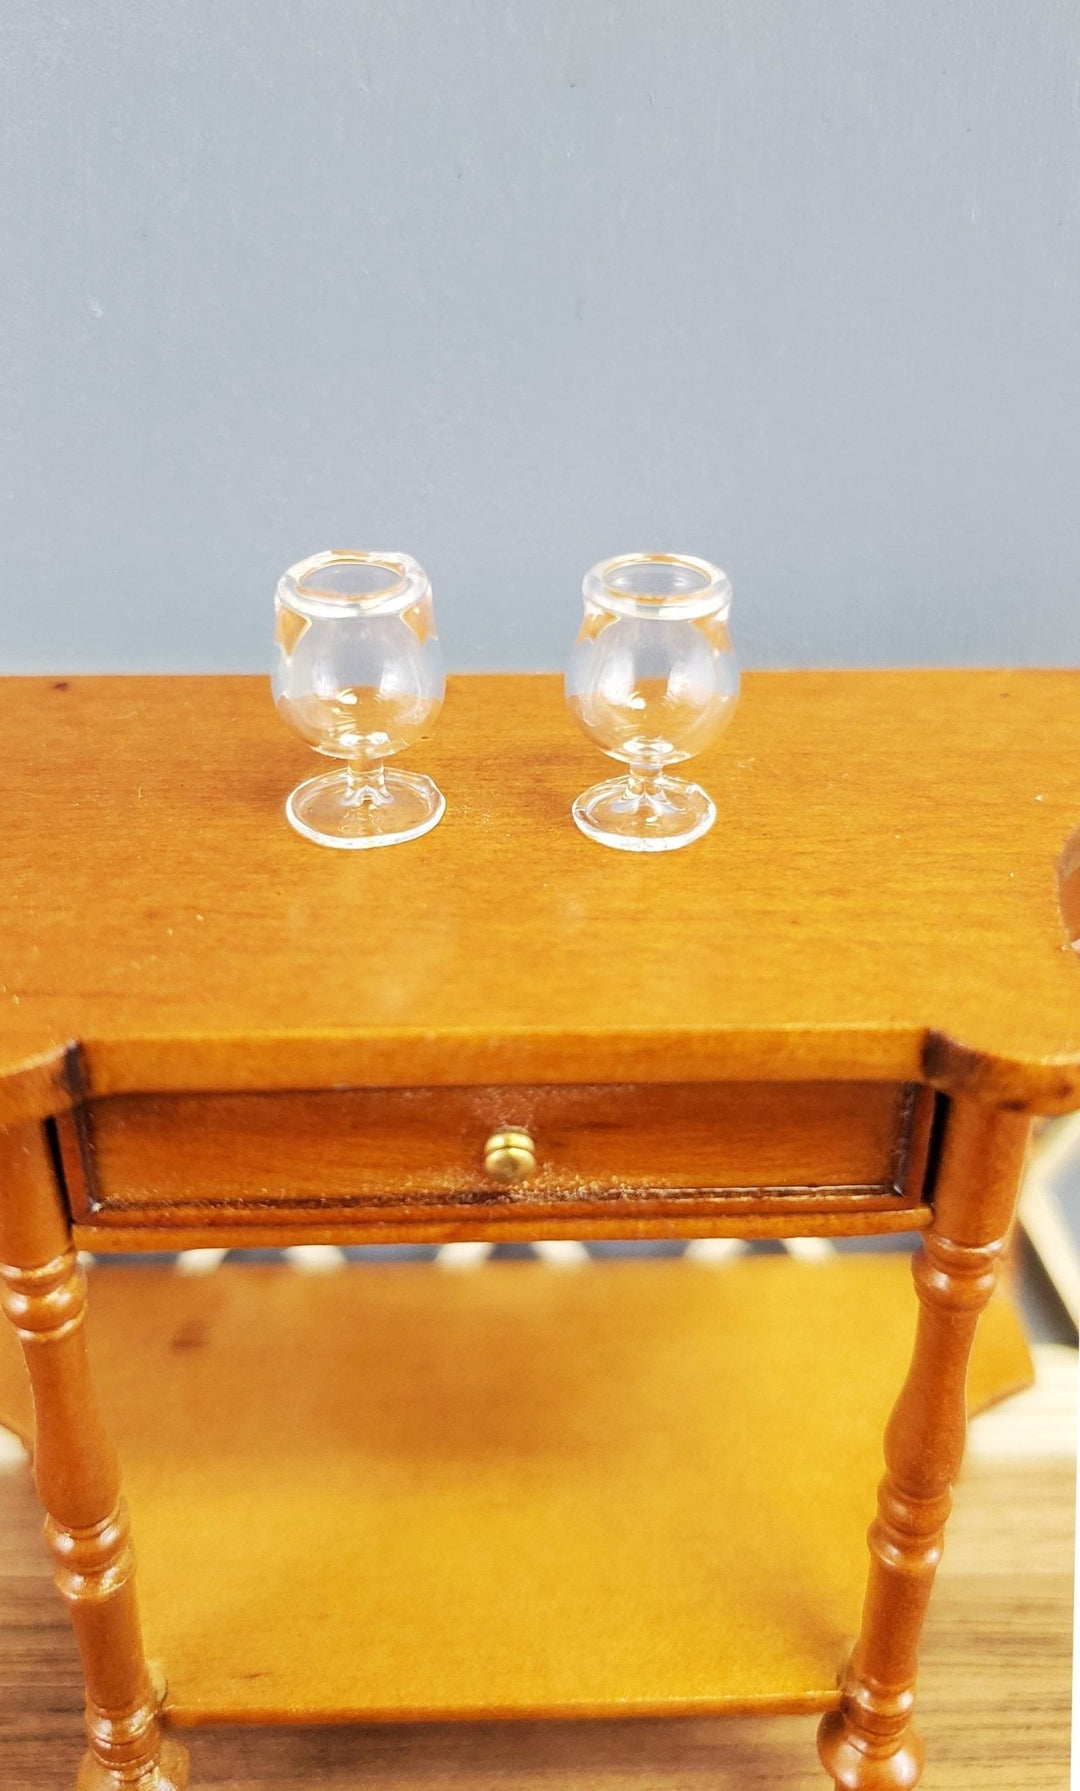 Dollhouse Miniature Brandy Snifter Set of 2 Glasses 1:12 Scale Philip Grenyer Hand Blown - Miniature Crush